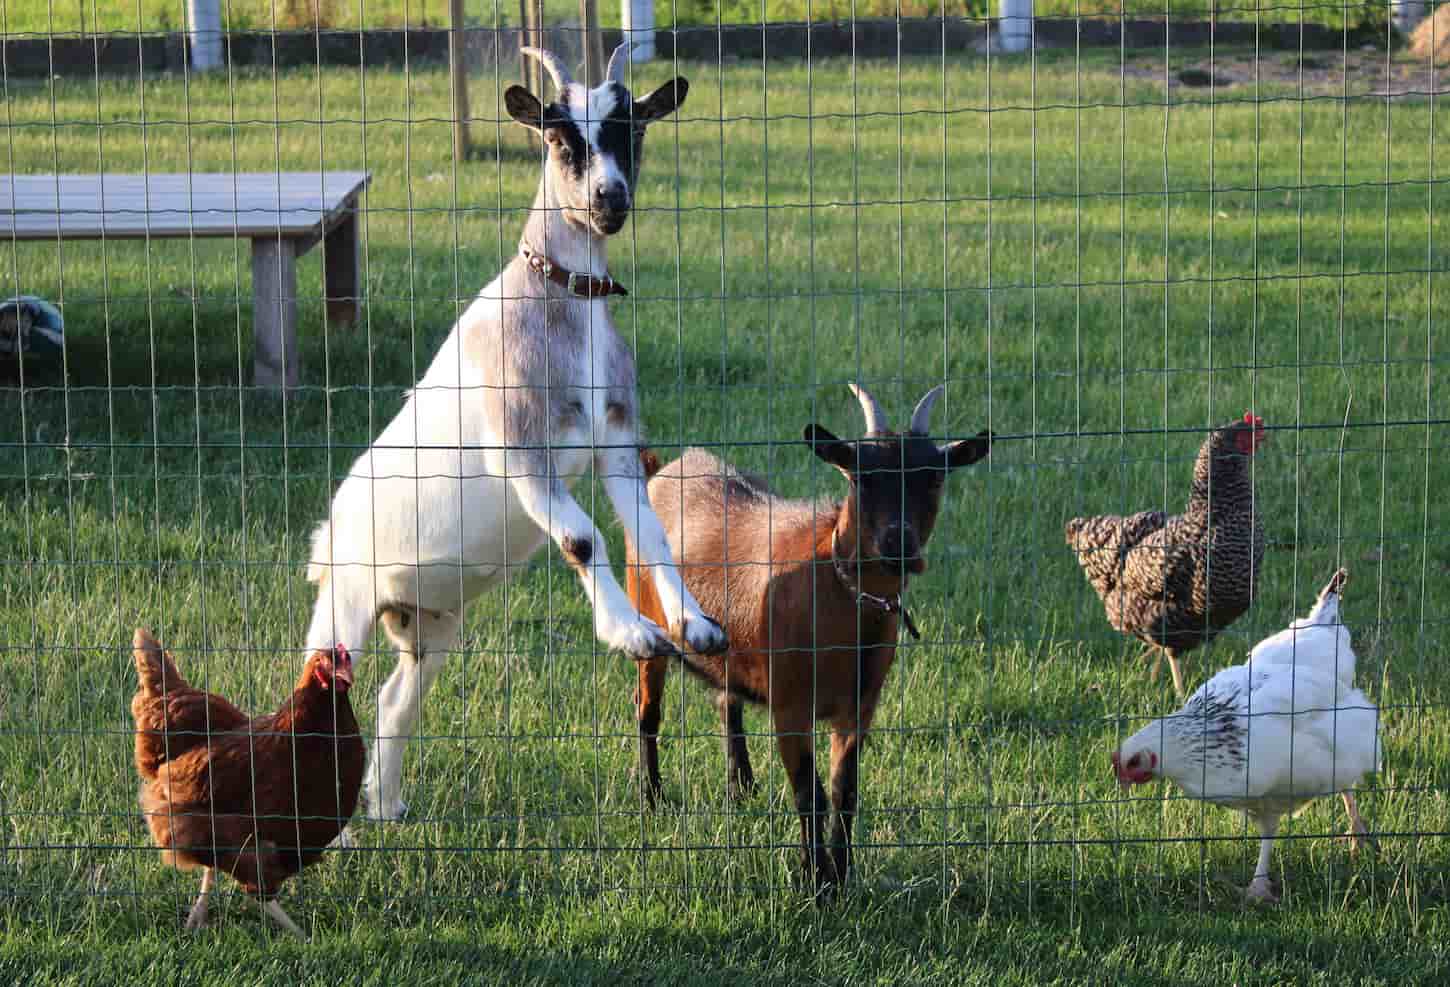 An image of Funny curious goats and chickens at the farm waiting for food.